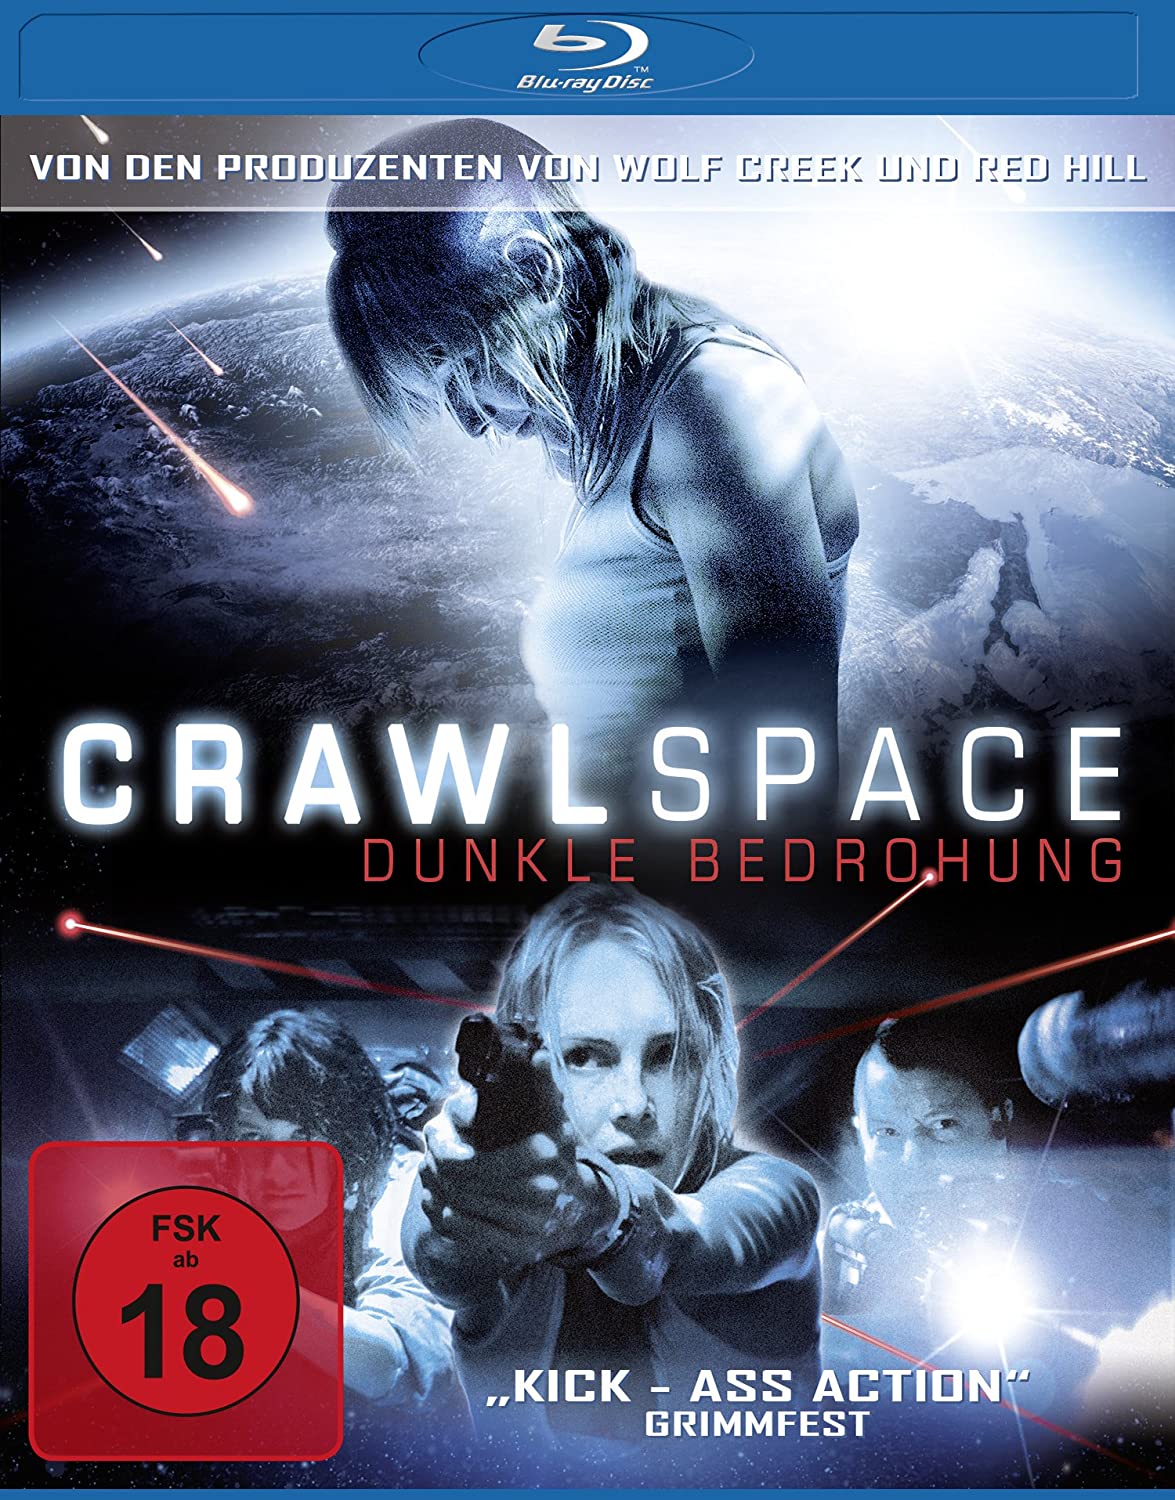 Crawlspace: Dunkle Bedrohung